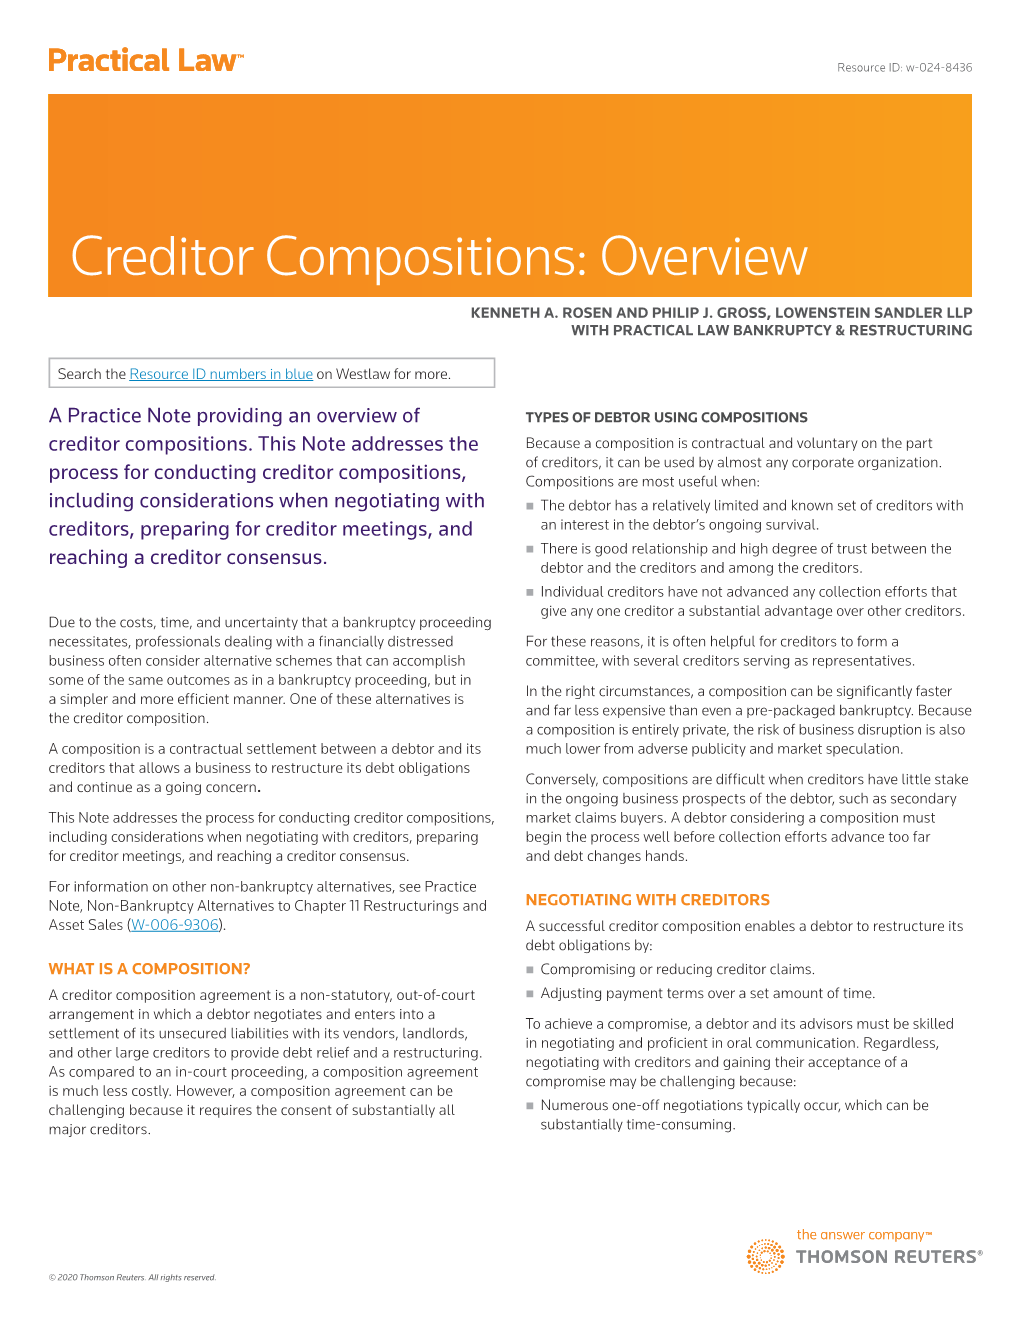 Creditor Compositions: Overview